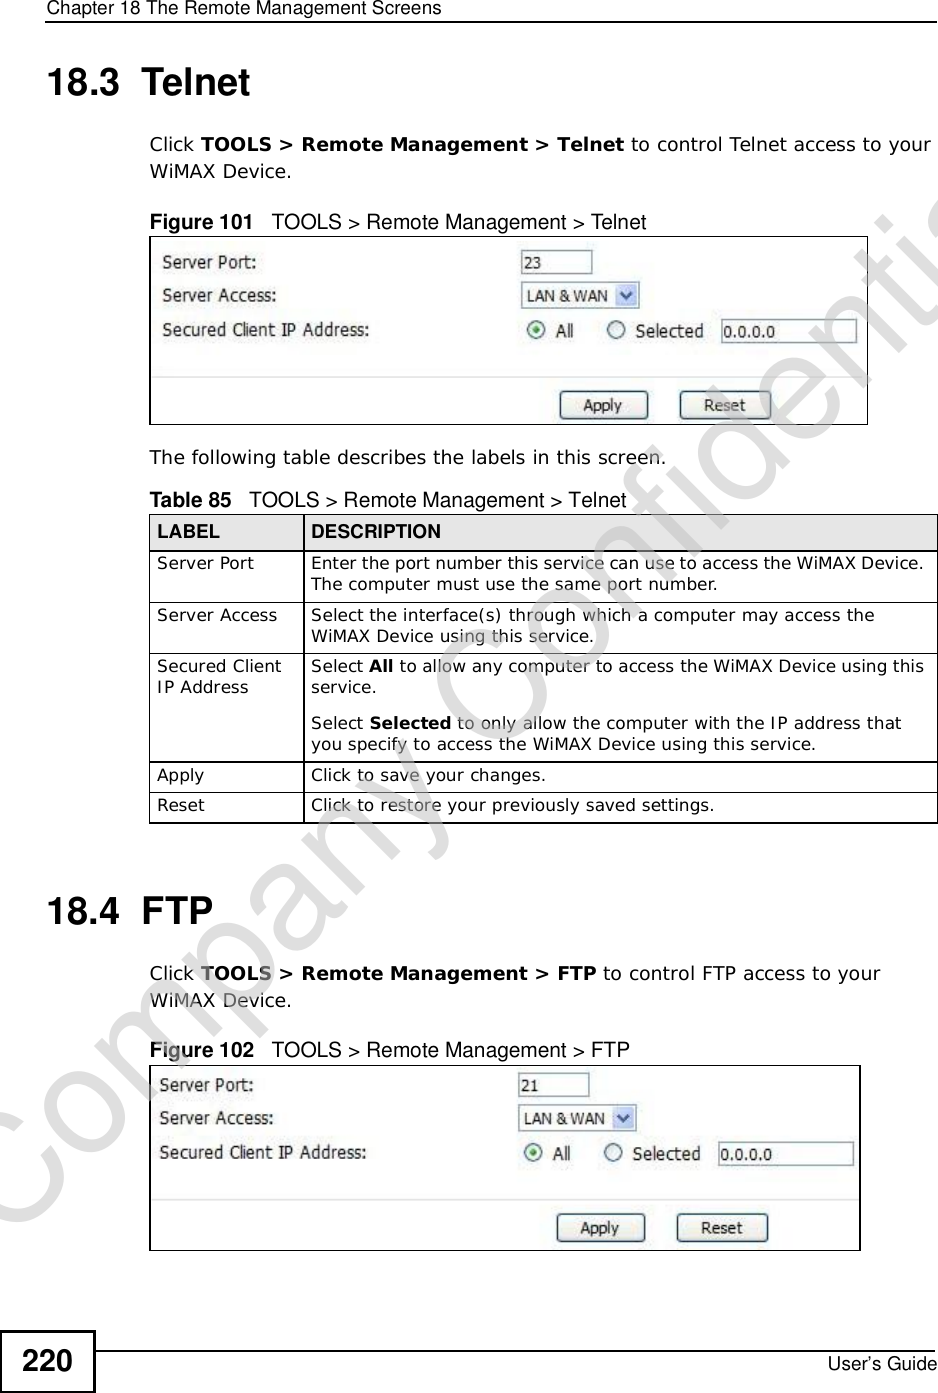 Chapter 18The Remote Management ScreensUser’s Guide22018.3  TelnetClick TOOLS &gt; Remote Management &gt; Telnet to control Telnet access to your WiMAX Device.Figure 101   TOOLS &gt; Remote Management &gt; TelnetThe following table describes the labels in this screen.18.4  FTPClick TOOLS &gt; Remote Management &gt; FTP to control FTP access to your WiMAX Device.Figure 102   TOOLS &gt; Remote Management &gt; FTPTable 85   TOOLS &gt; Remote Management &gt; TelnetLABEL DESCRIPTIONServer Port Enter the port number this service can use to access the WiMAX Device. The computer must use the same port number.Server Access Select the interface(s) through which a computer may access the WiMAX Device using this service.Secured Client IP Address Select All to allow any computer to access the WiMAX Device using this service.Select Selected to only allow the computer with the IP address that you specify to access the WiMAX Device using this service.Apply Click to save your changes.Reset Click to restore your previously saved settings.Company Confidential